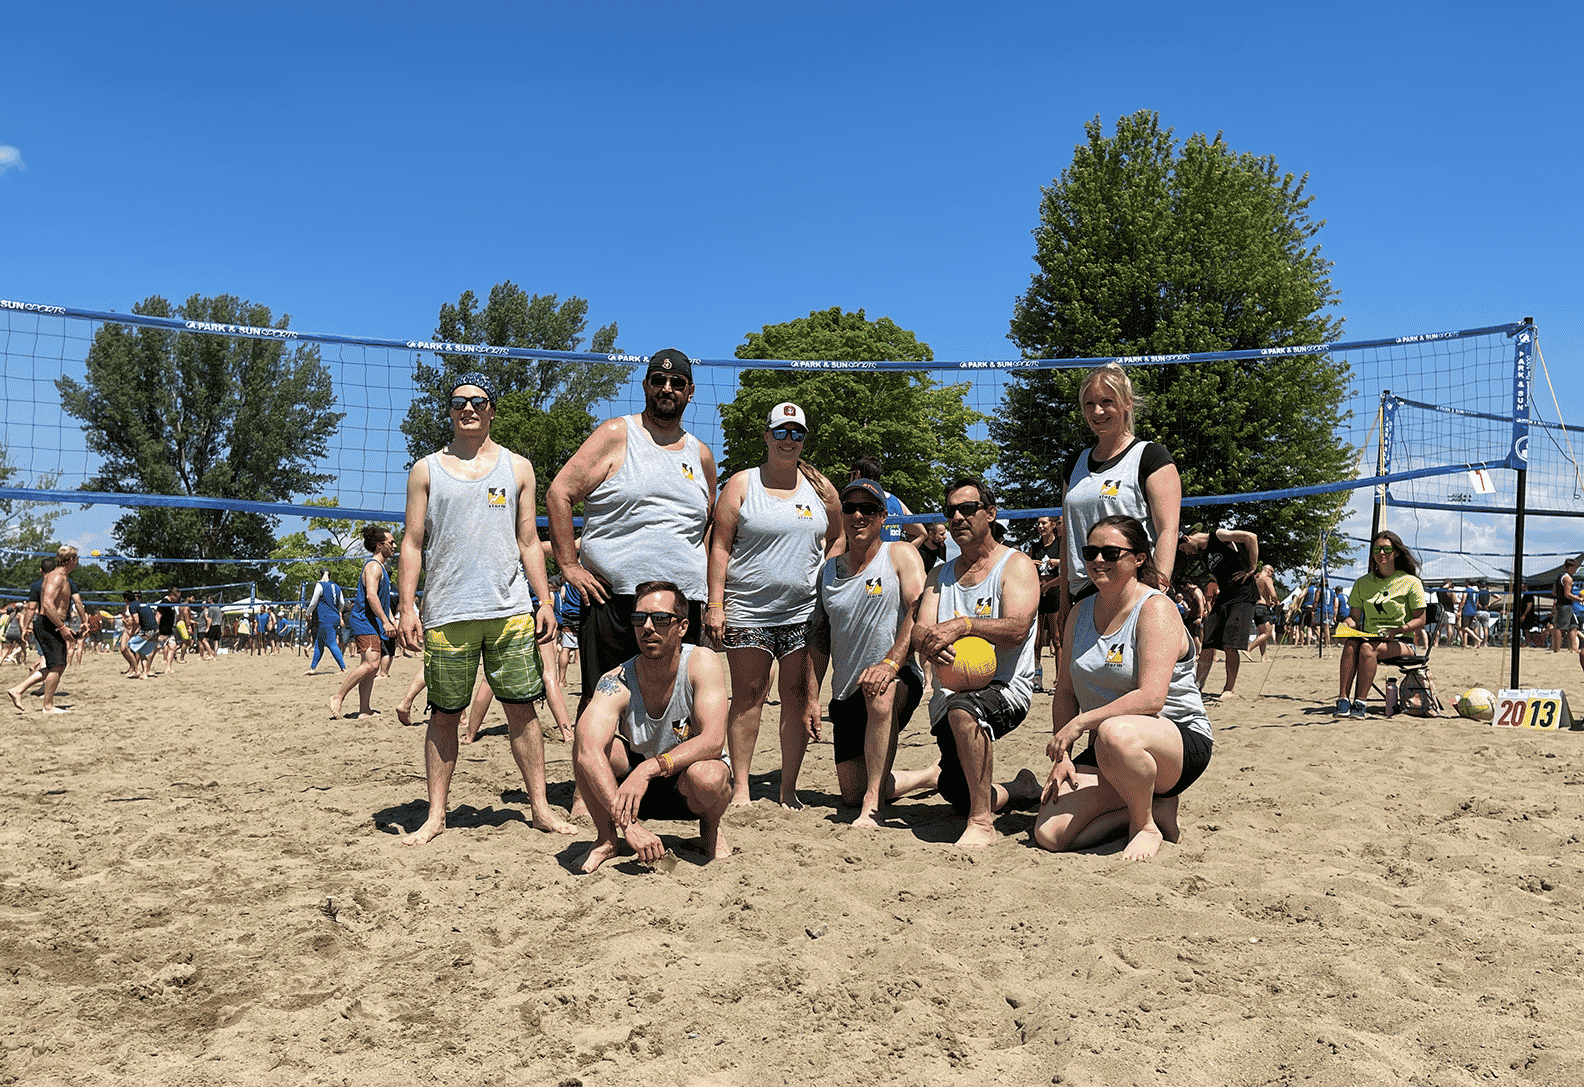 Group image of the Storm Internet team who participated in Hope Volleyball 2022. The team is standing on a sand beach court in front of a volleyball net.